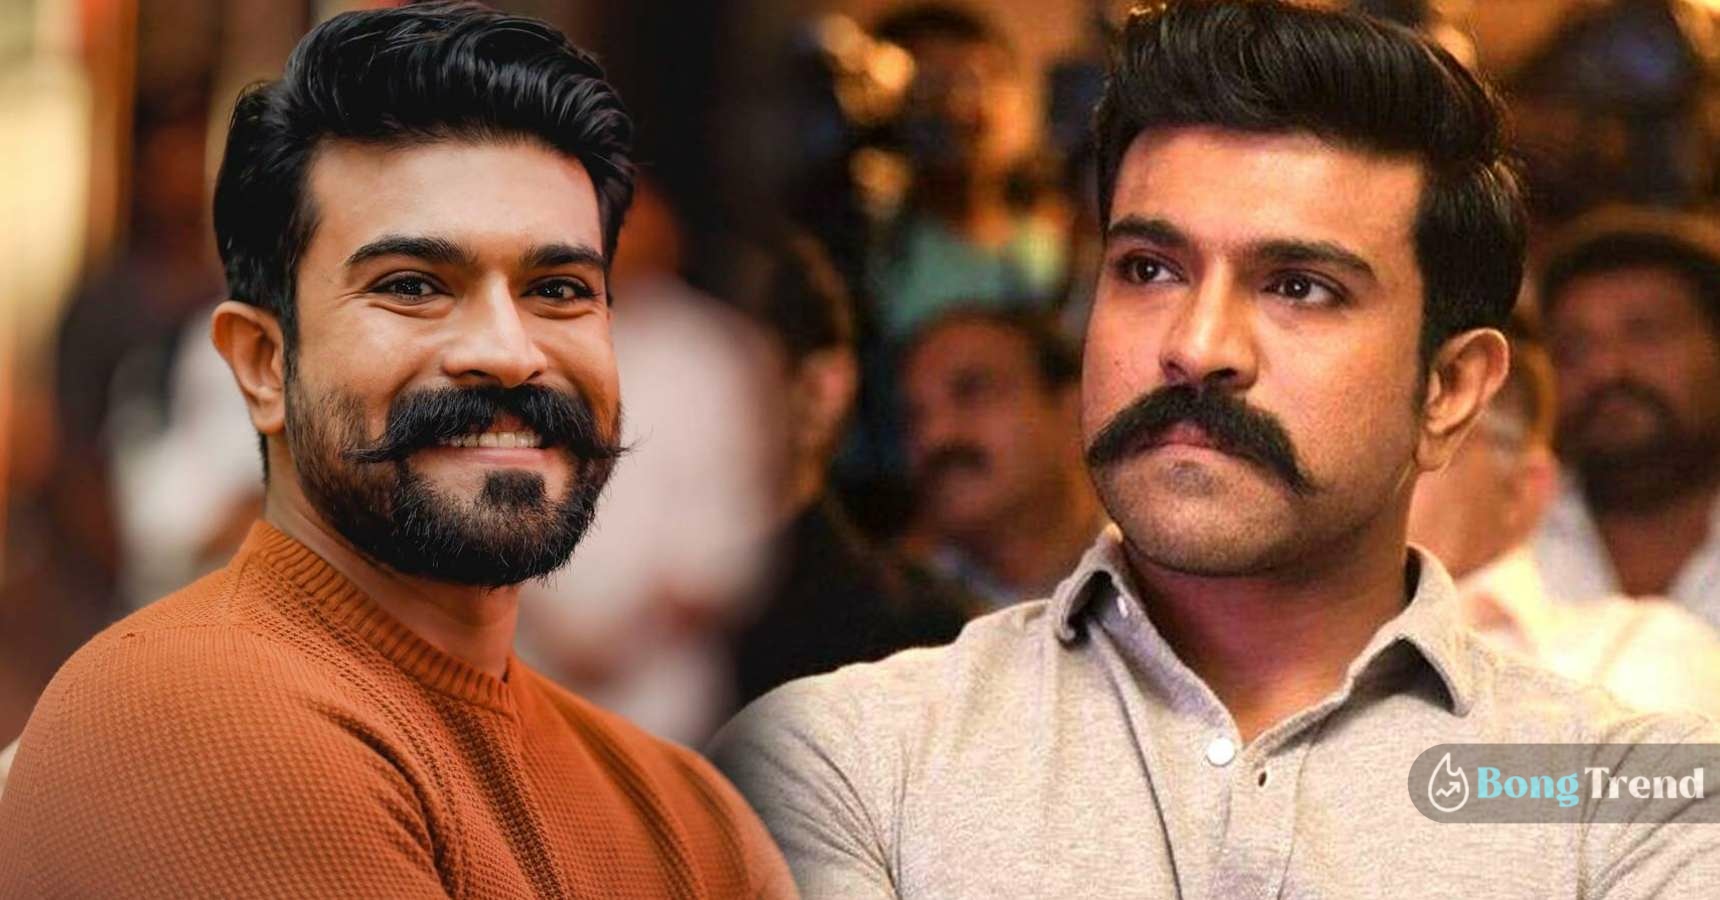 Ram Charan Said Want to make movies for country inpresses viewers